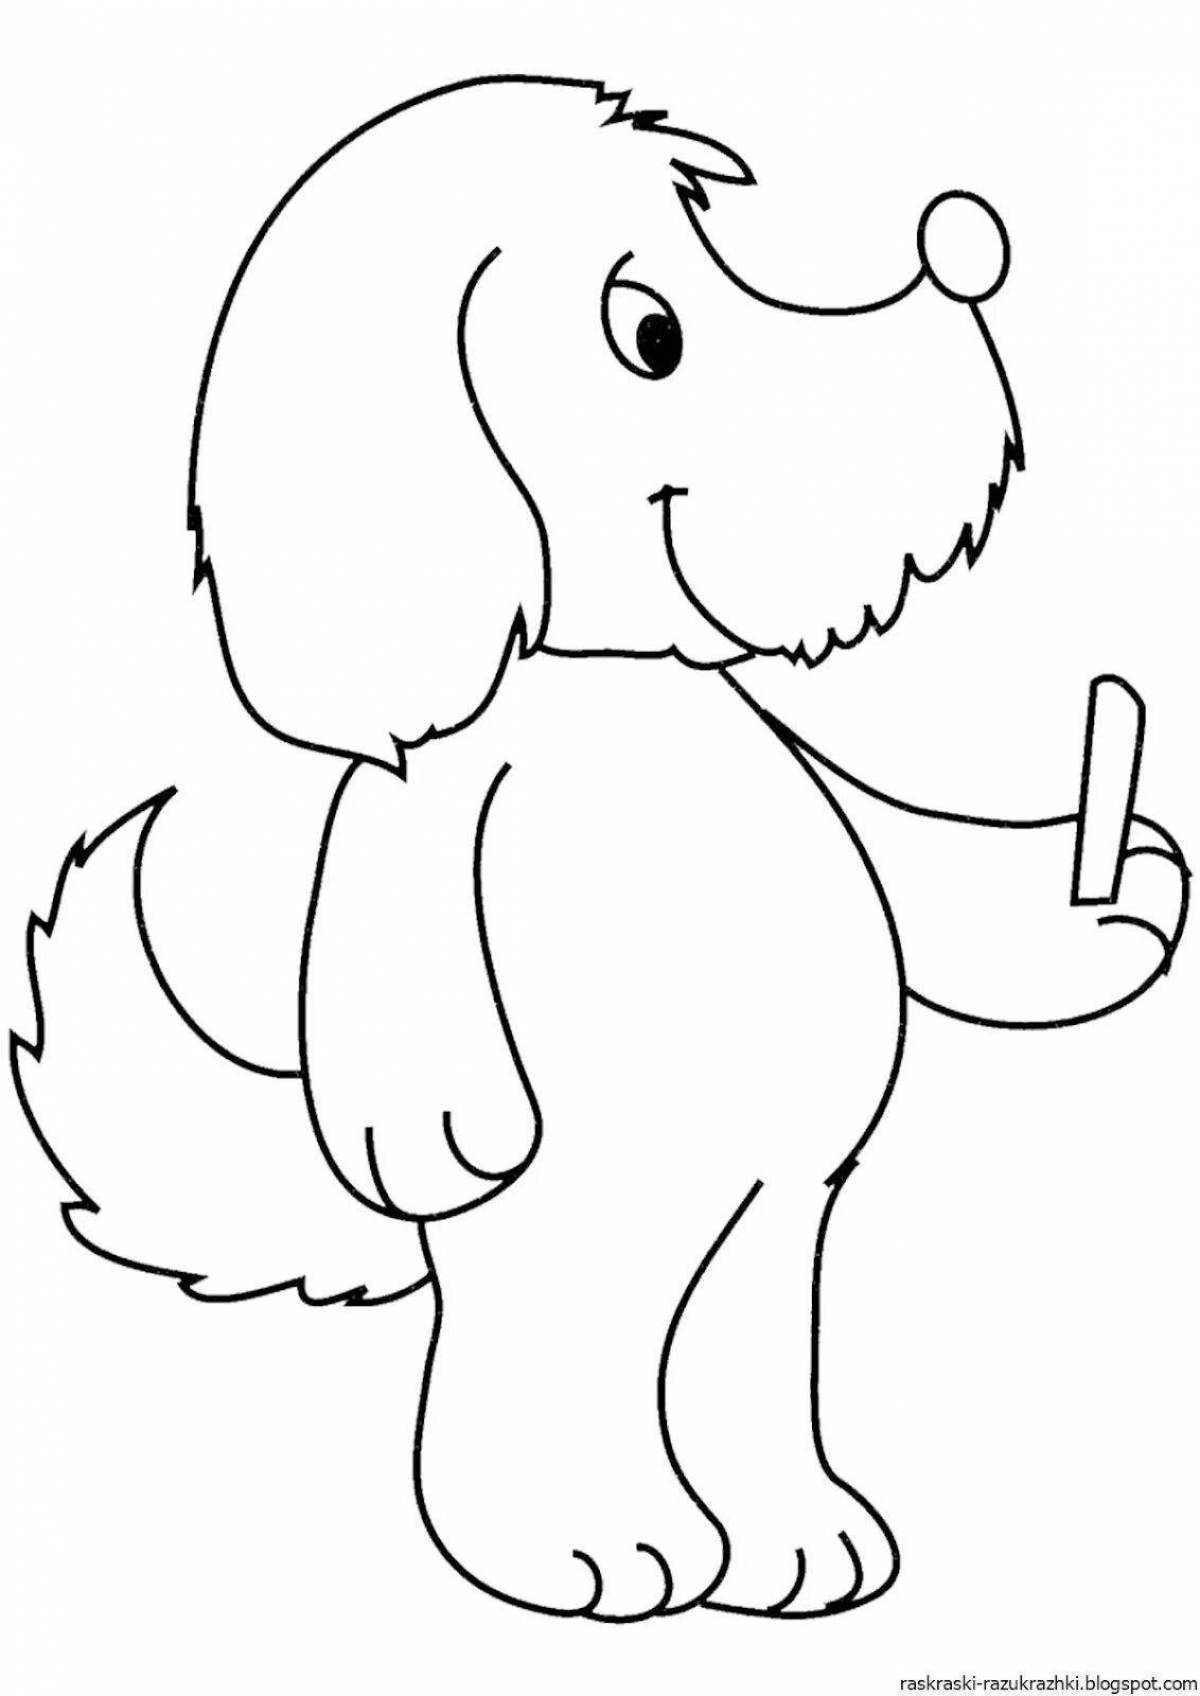 Colourful dog coloring book for children 2-3 years old